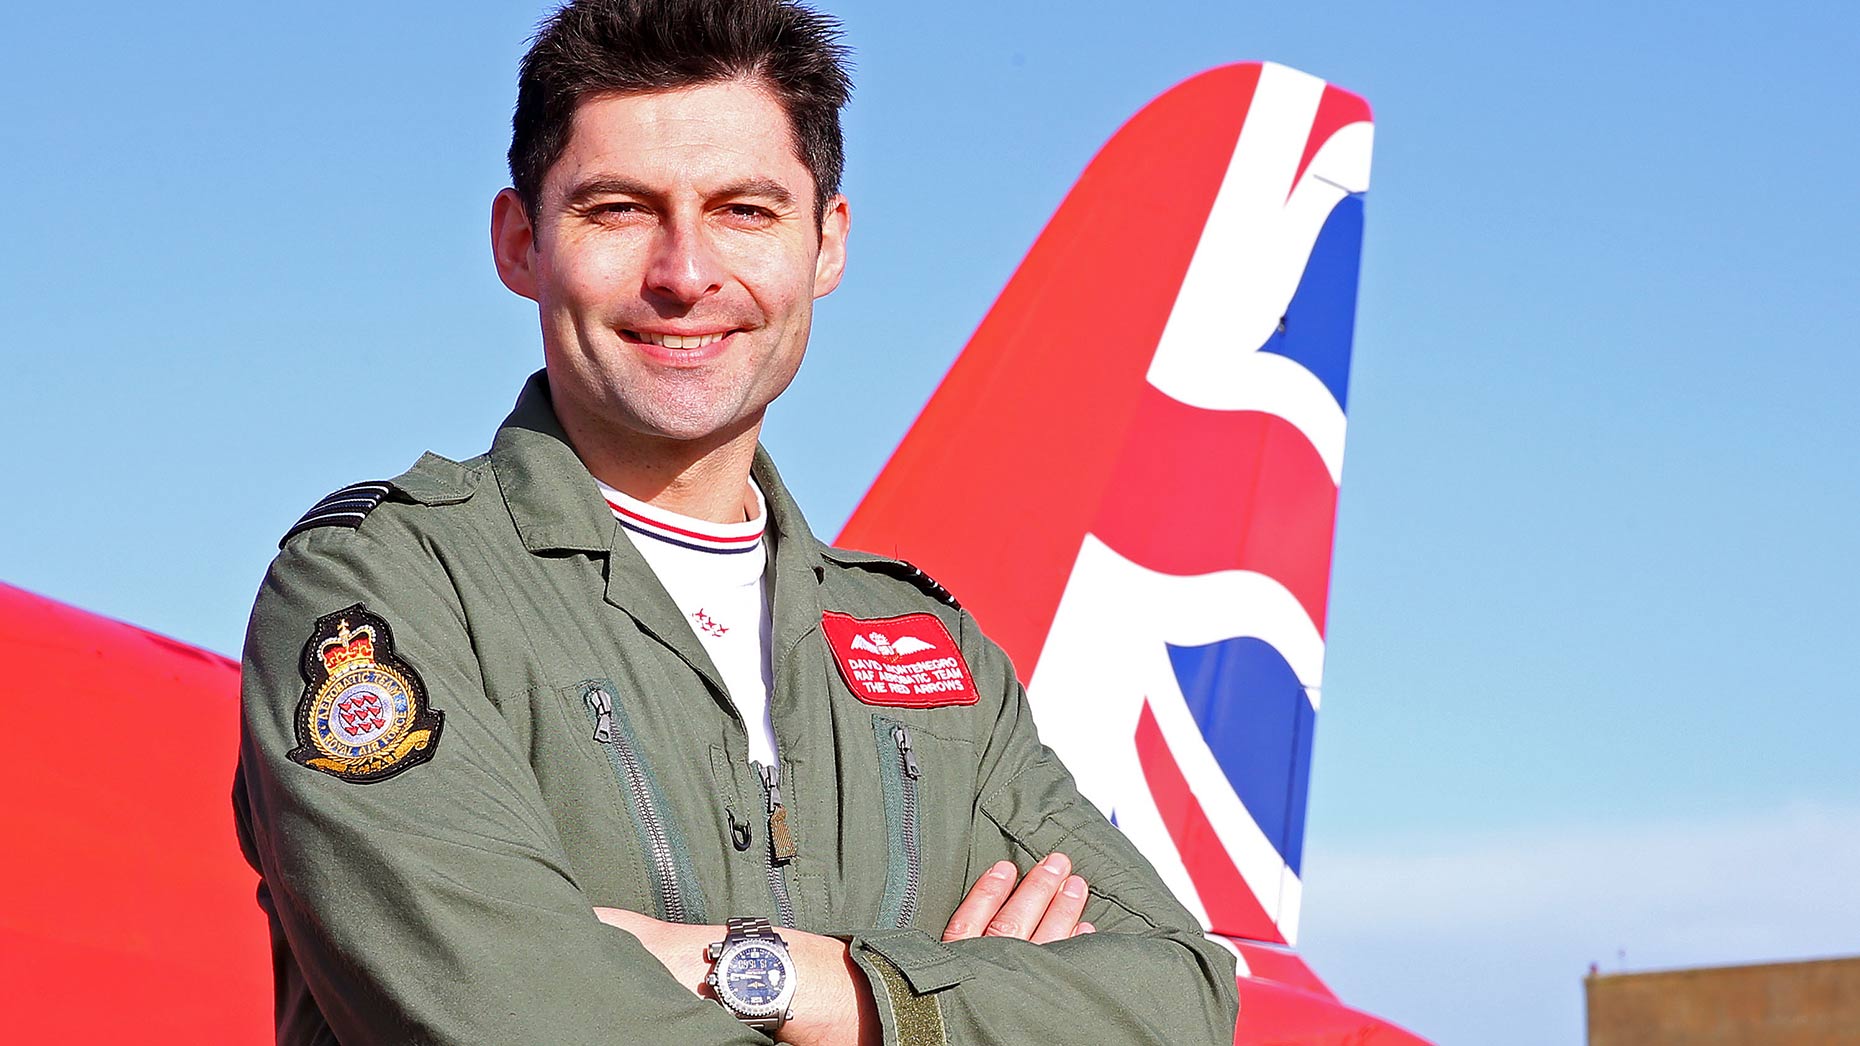 Squadron Leader David Montenegro, Red 1 and Team Leader of the Royal Air Force Aerobatic Team, with the new Union flag tailfin. Photo Craig Marshall, MoD/Crown Copyright 2015. 